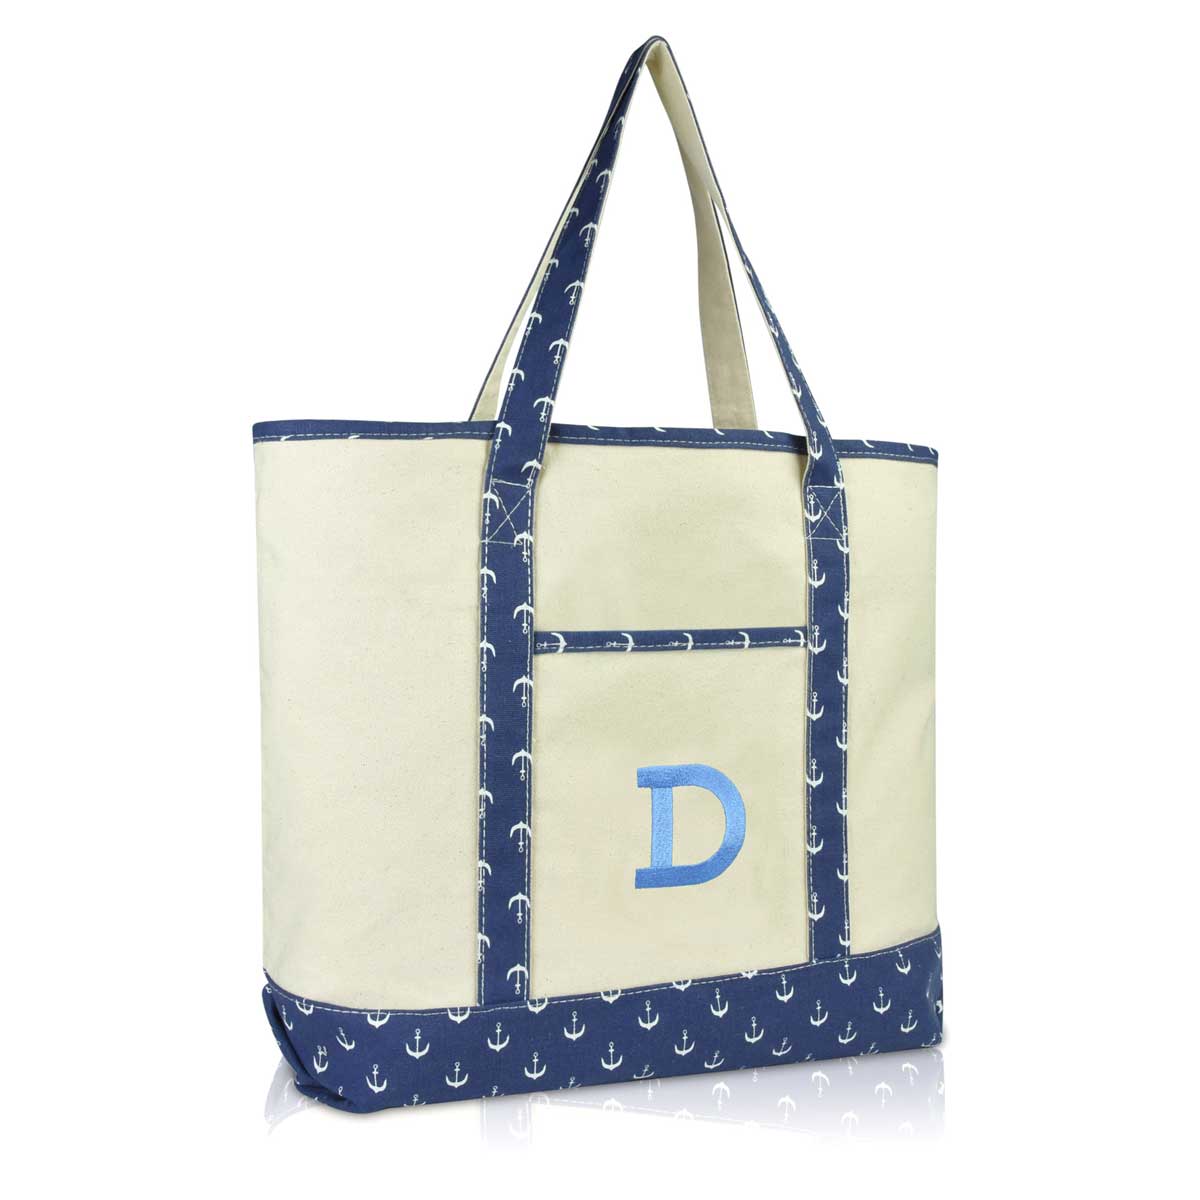 Dalix Initial Tote Bag Zippered Top Embroidered Letter - D | Dalix.com